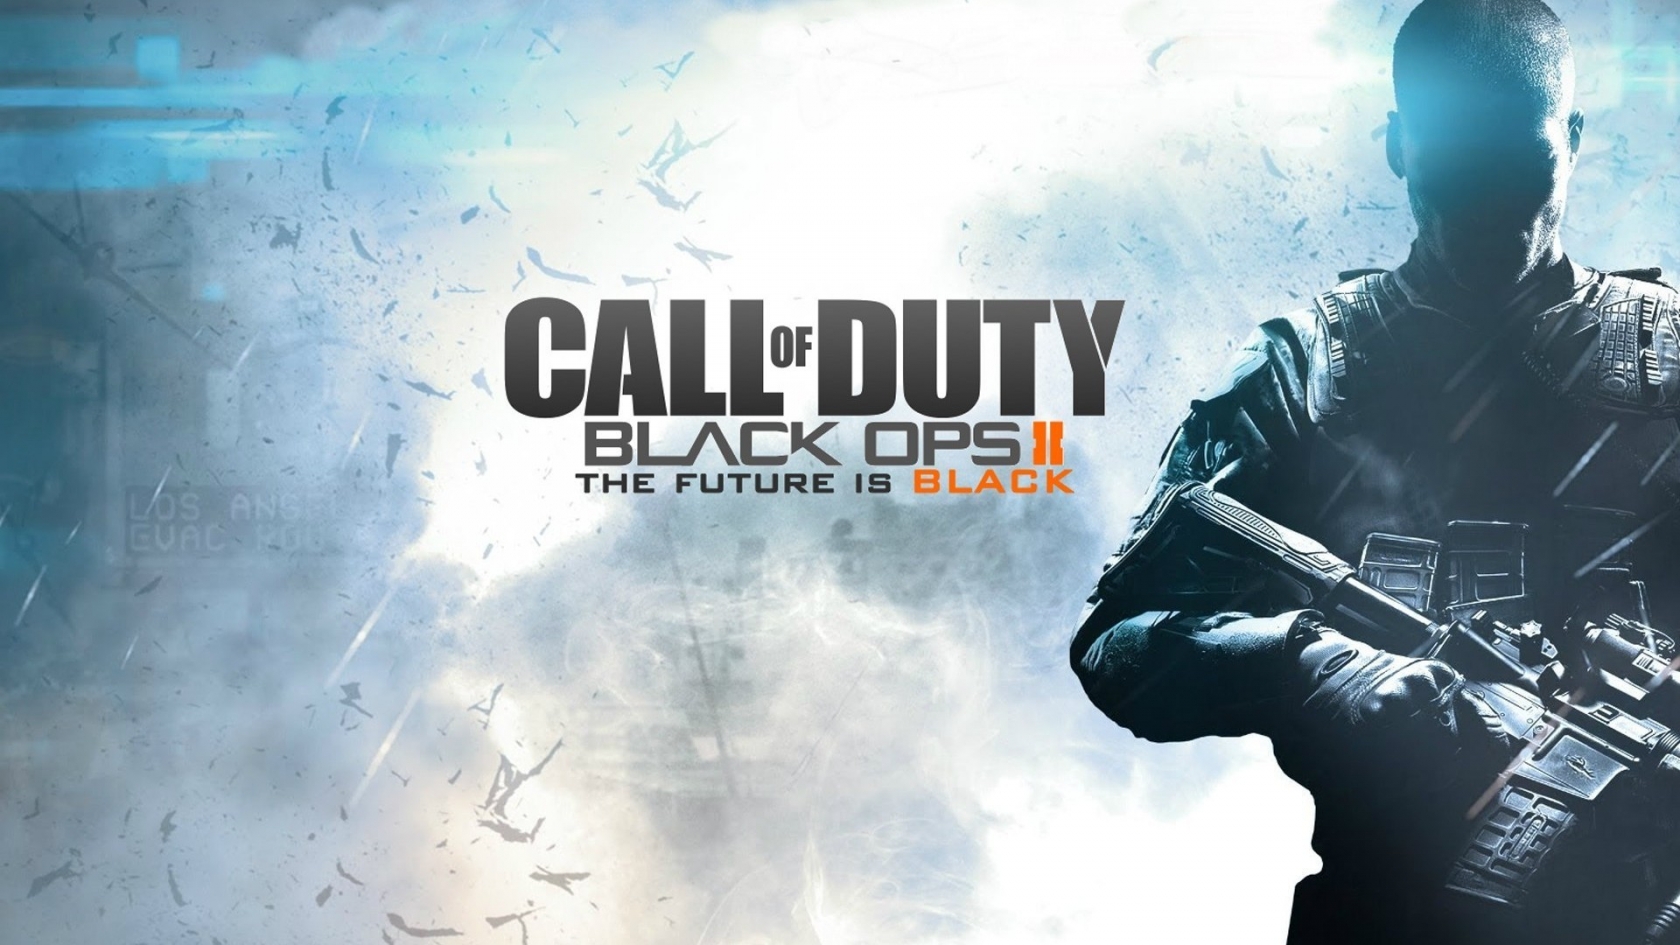 Call of Duty Black Ops 2 Future Black for 1680 x 945 HDTV resolution